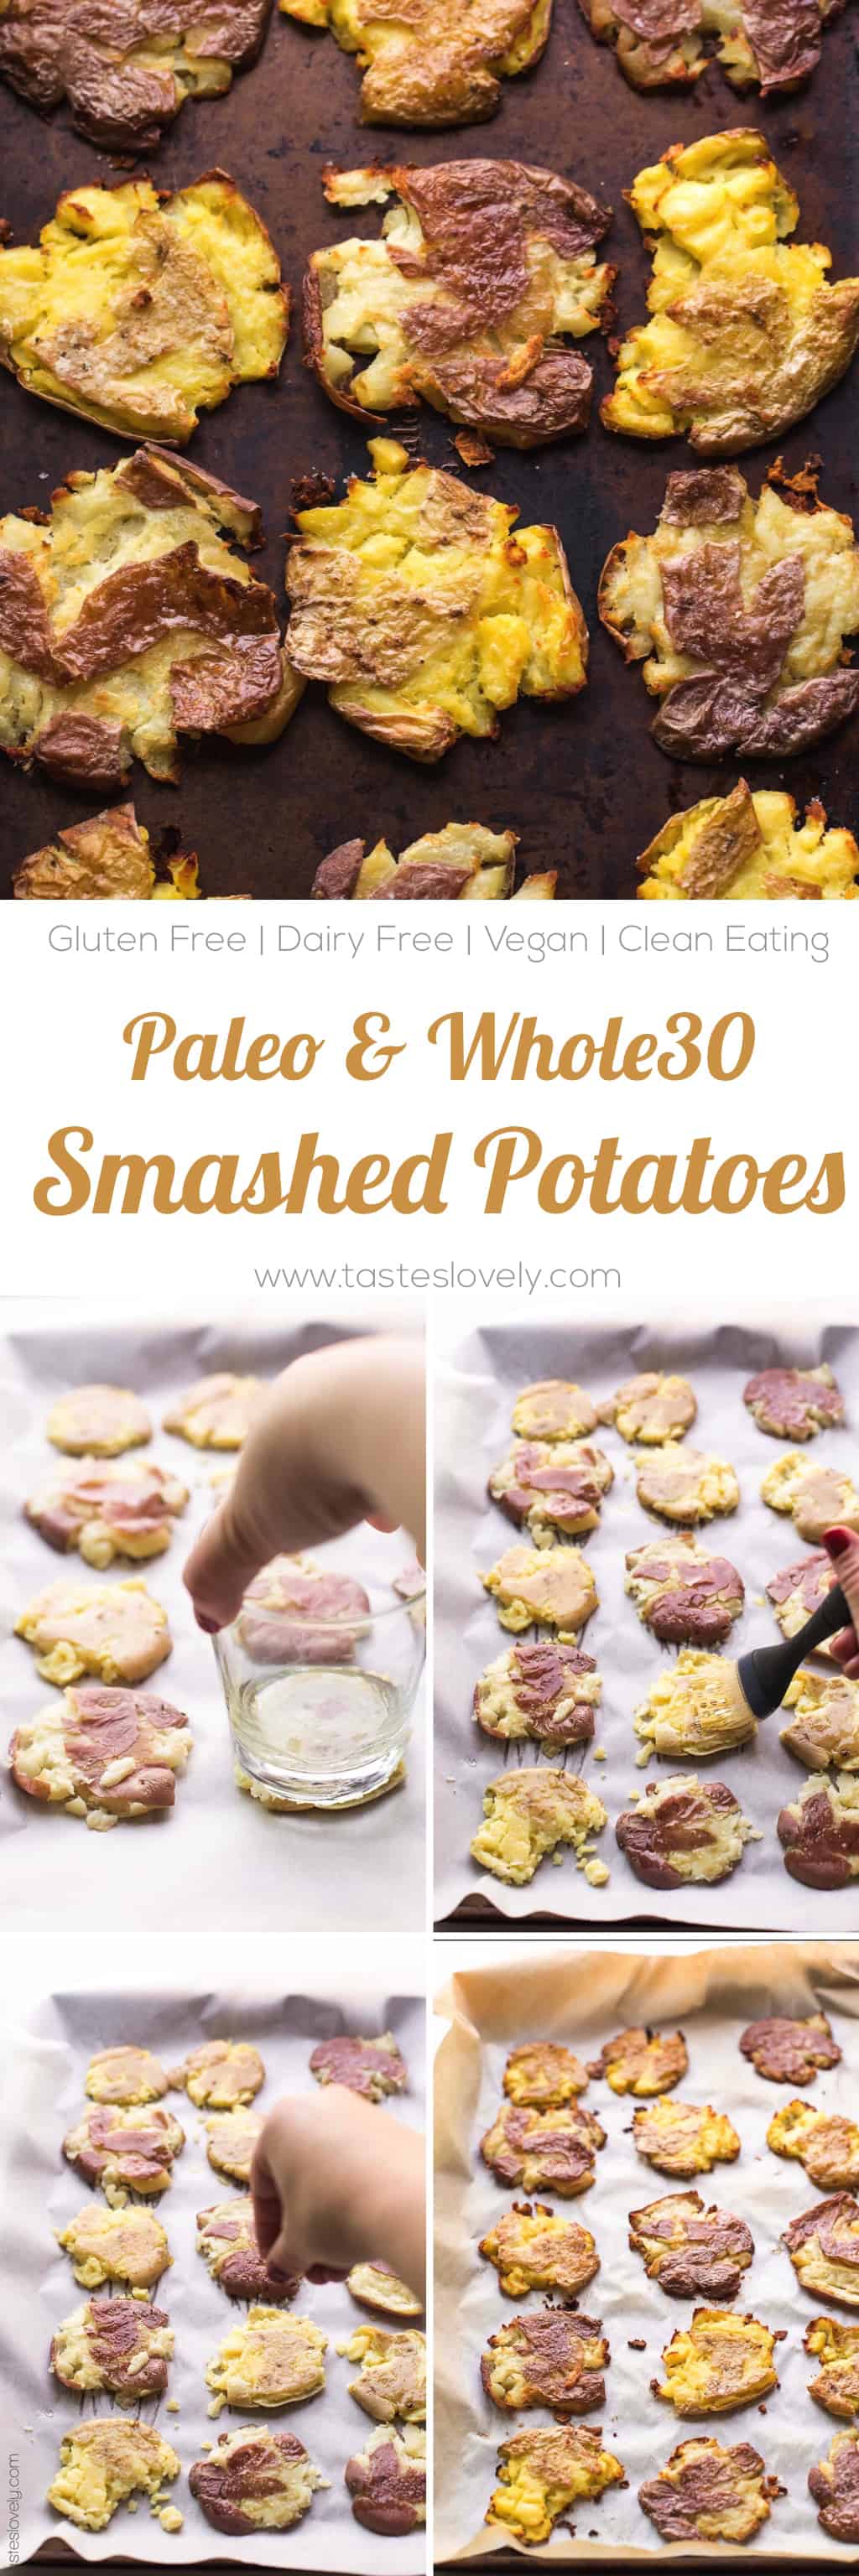 Paleo & Whole30 Crispy Smashed Potatoes - soft and fluffy on the outside, crispy and golden brown on the outside. The most delicious side dish recipe! Gluten free, grain free, dairy free, sugar free, clean eating, vegan.